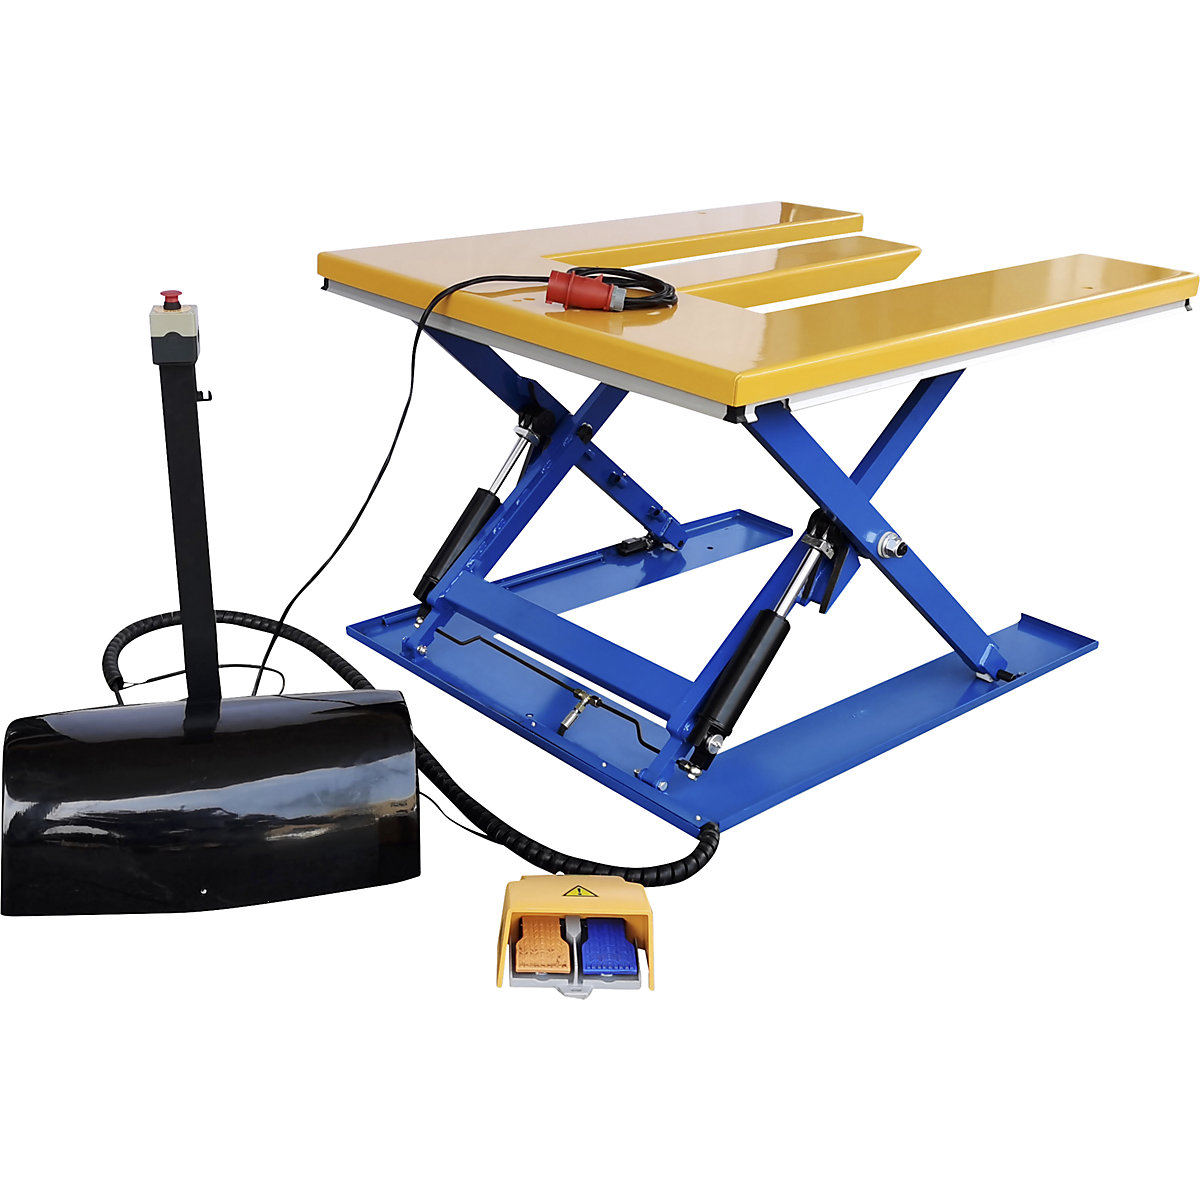 Low profile lift table – eurokraft basic, E shaped, max. load 1200 kg, foot operated control unit